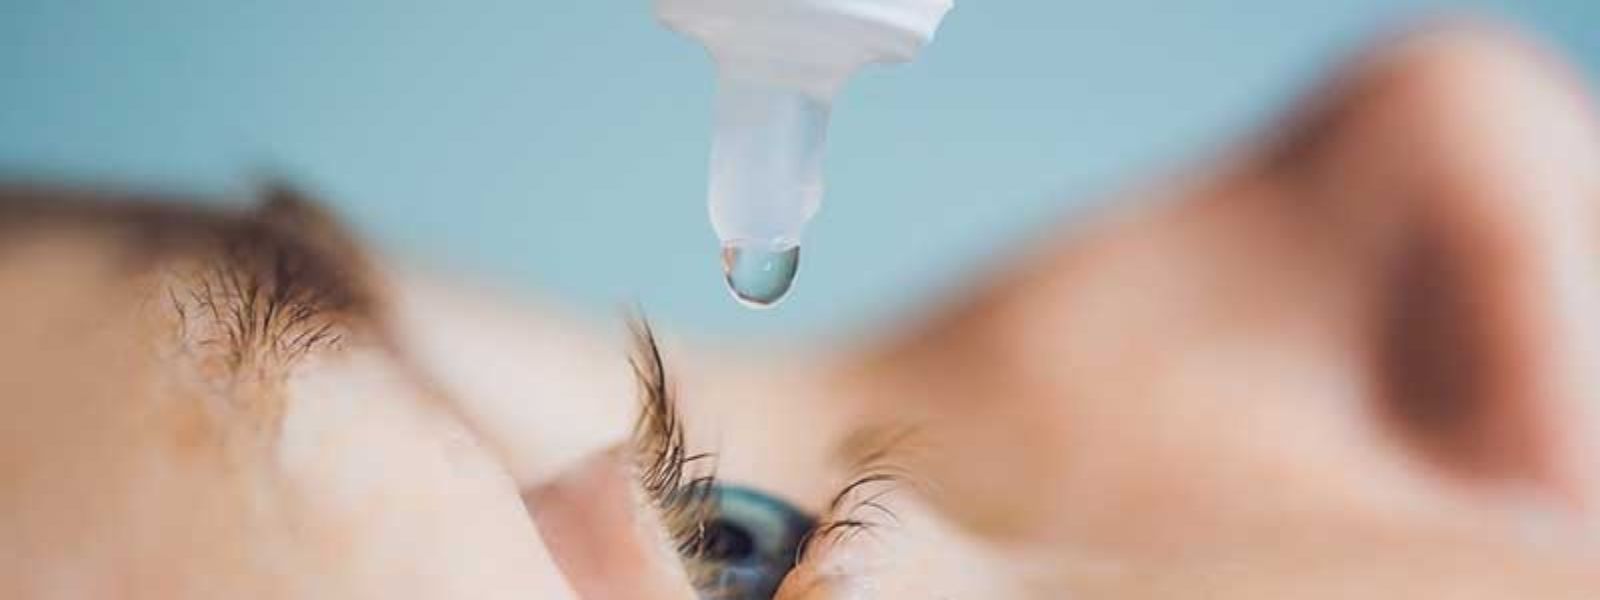 Prednisolone eye drops to be blacklisted